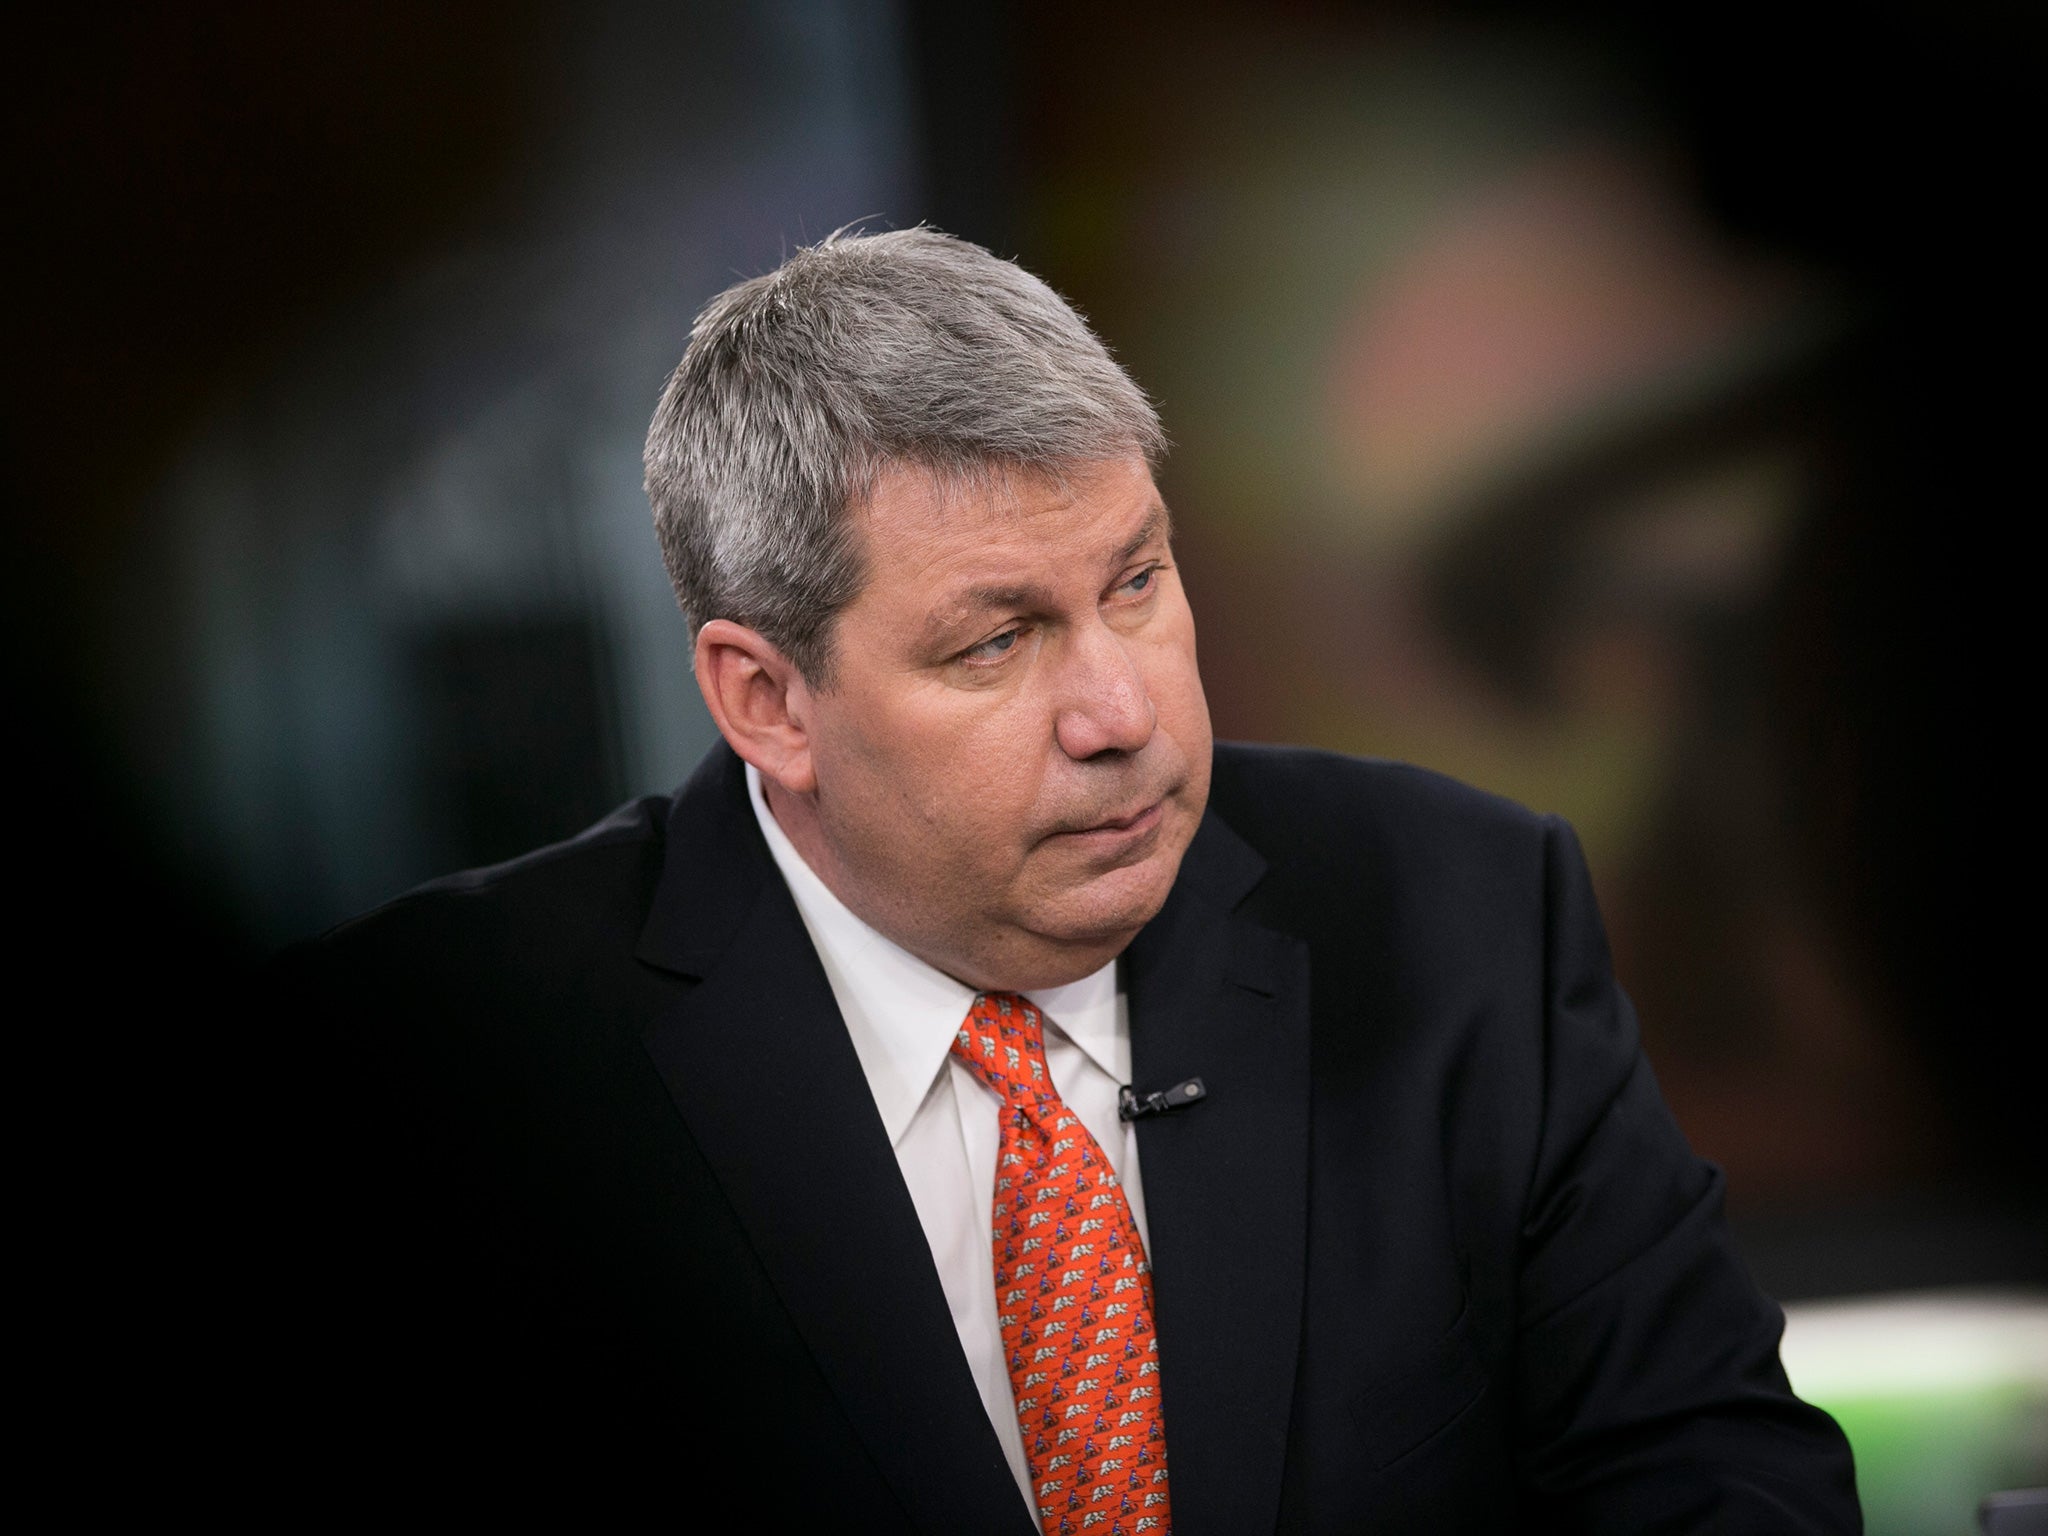 US authorities are investigating Valeant International and its chairman J Michael Pearson